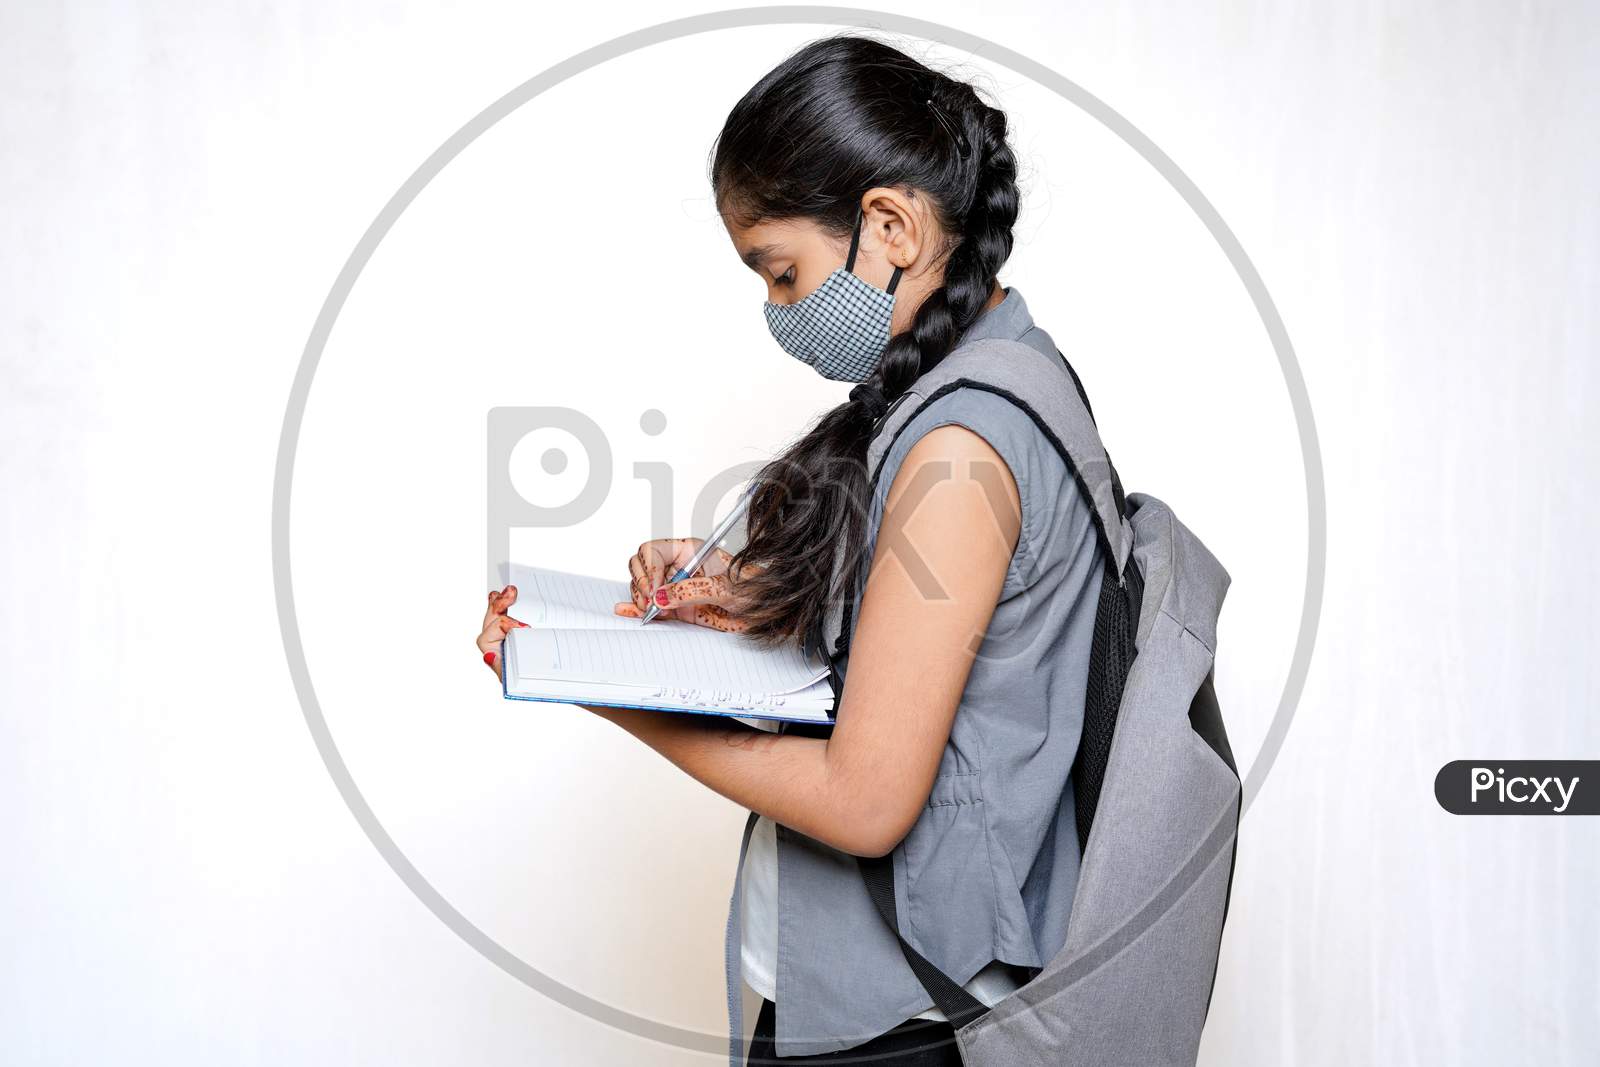 Indian Girl Writing On Notebook